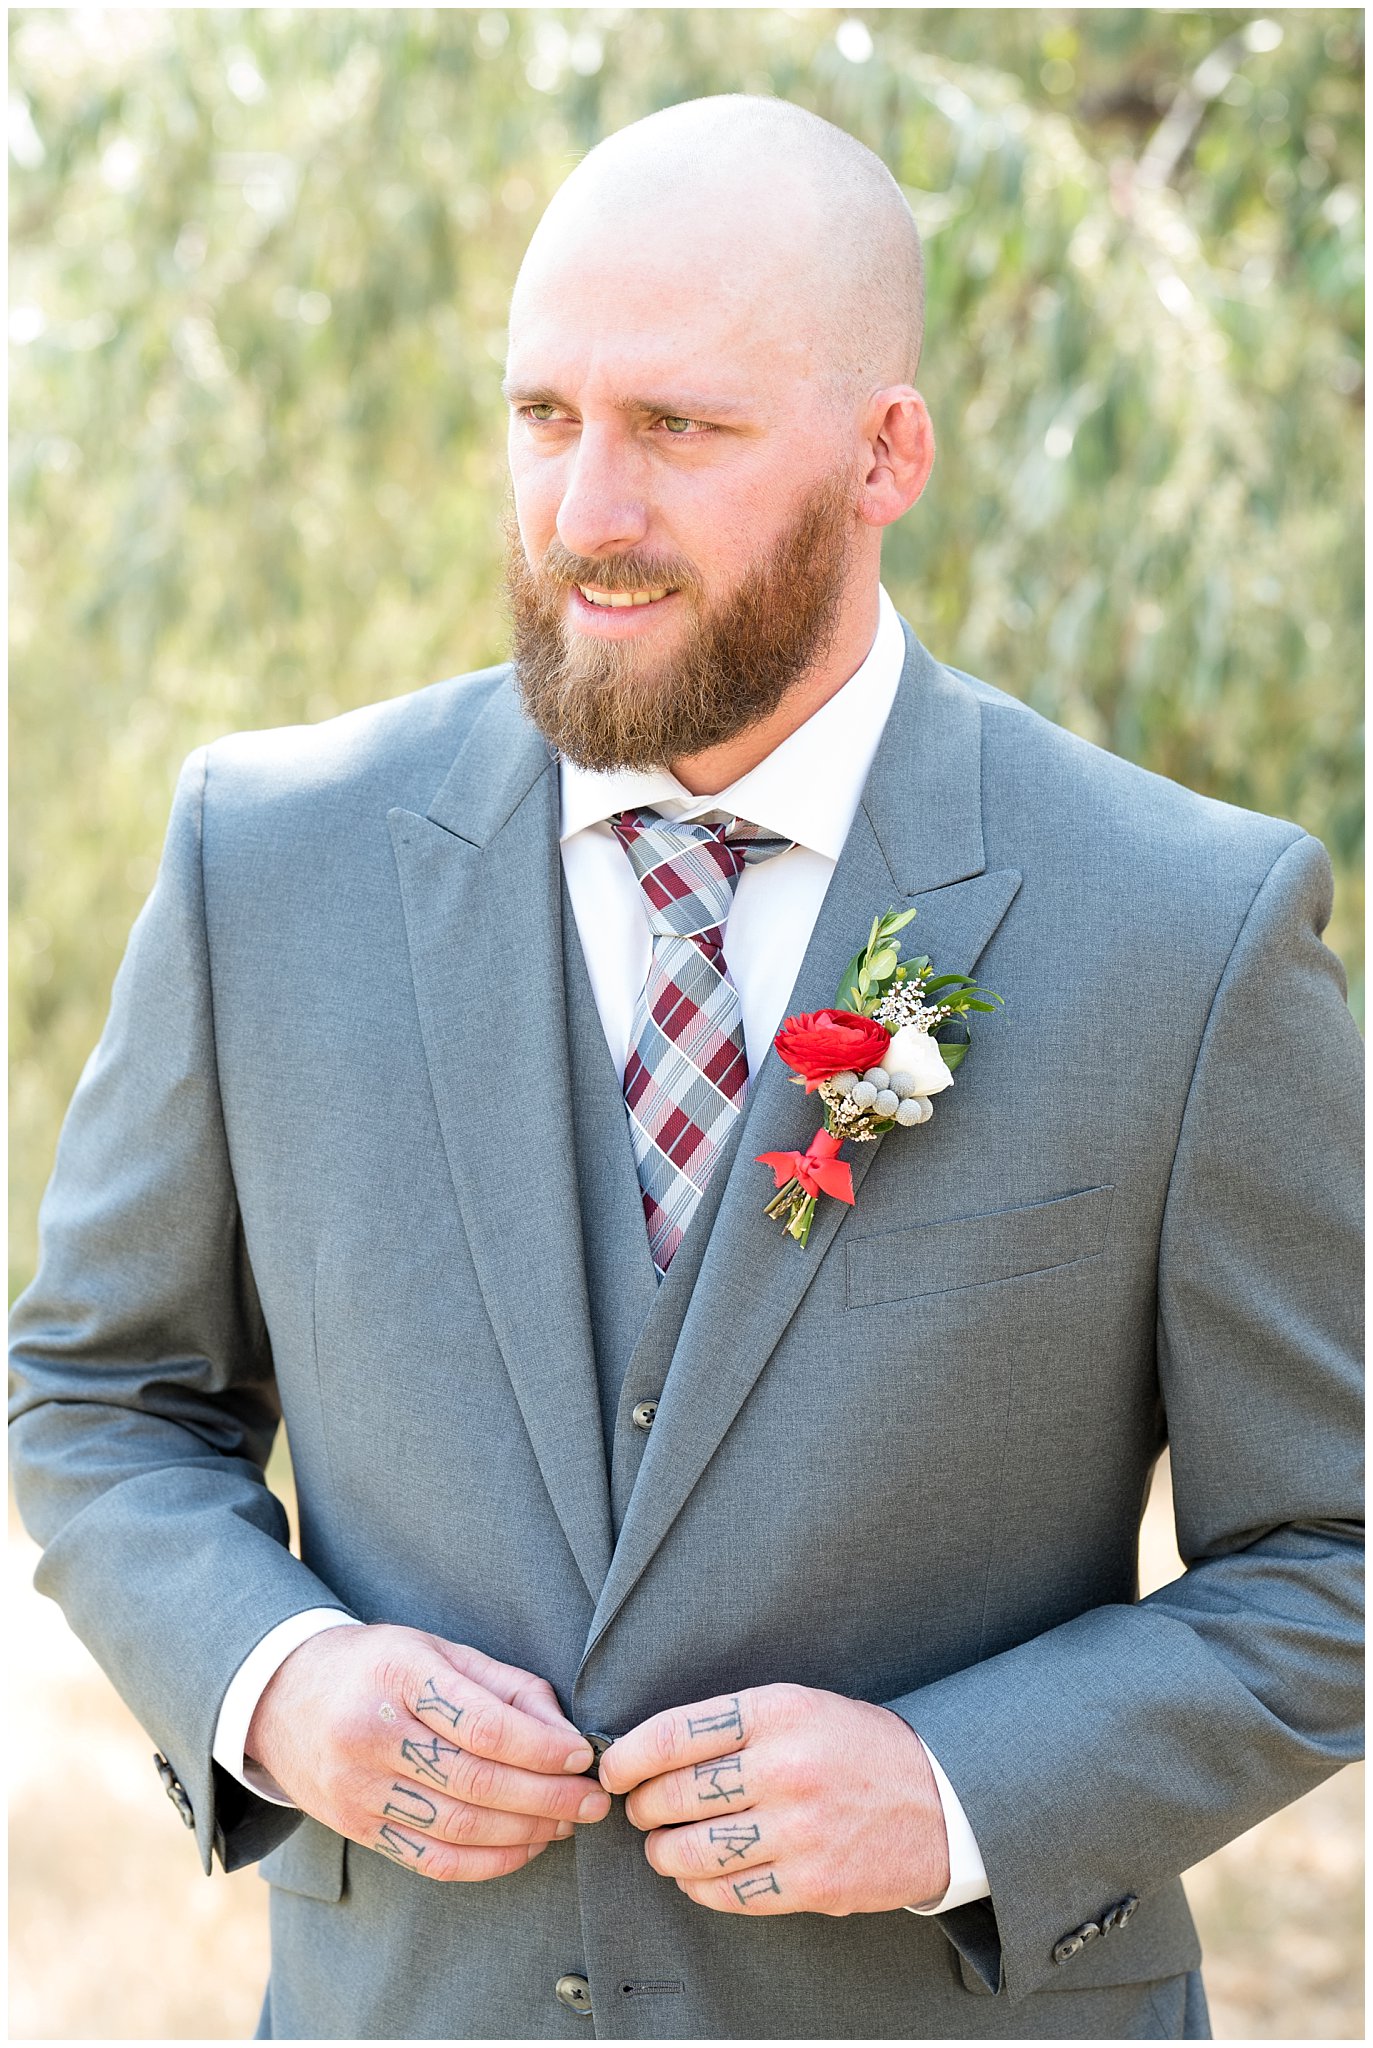 Candid groom buttoning up suit portrait | Davis County Outdoor Wedding | Jessie and Dallin Photography